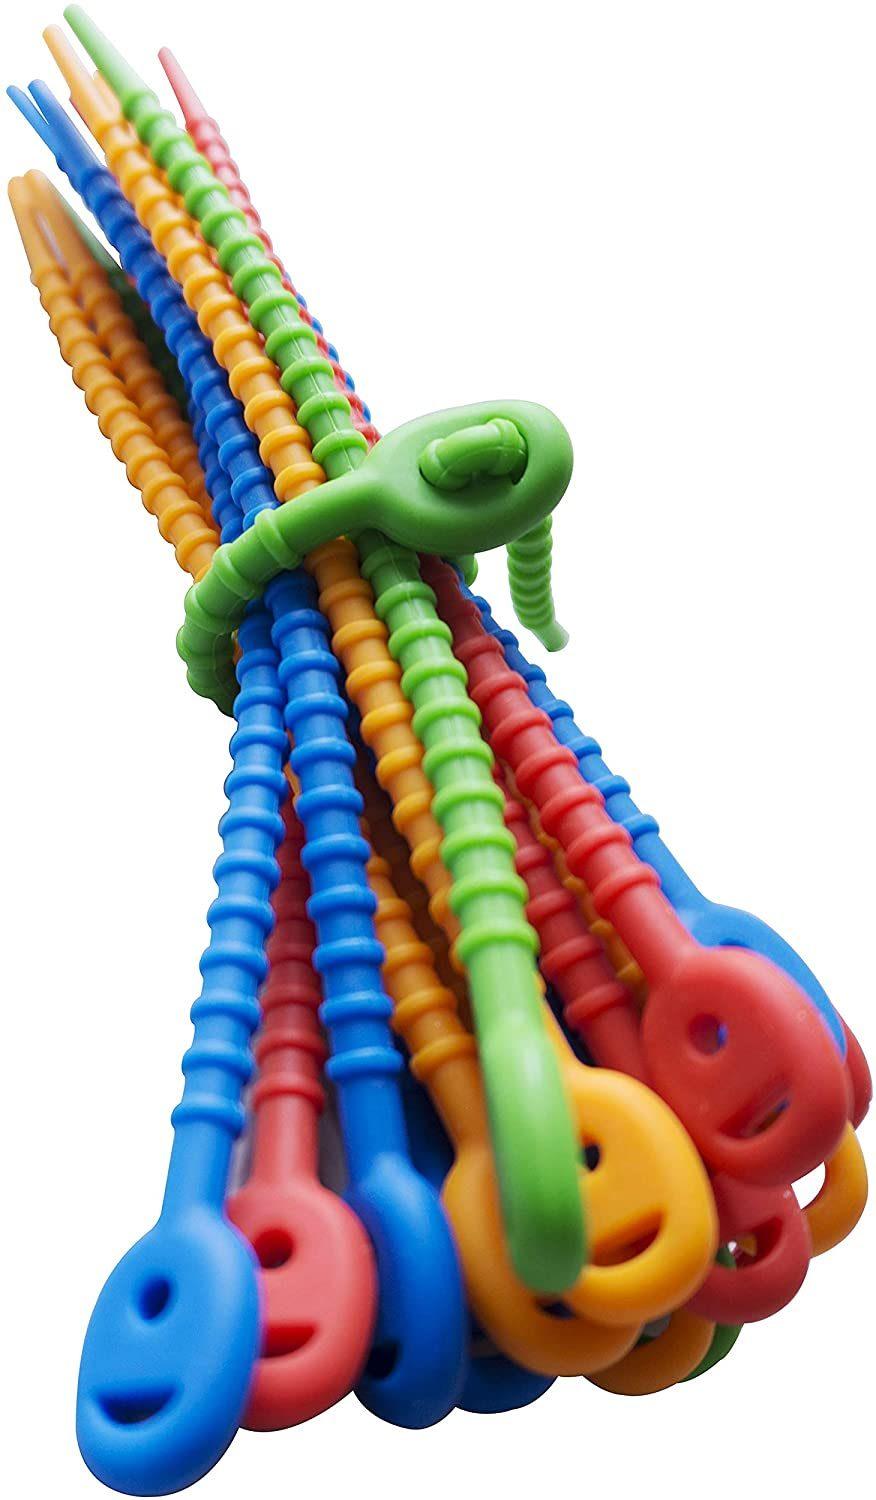 Colorful All-Purpose Silicone Ties Cable Straps Bread Tie Household Snake Ties